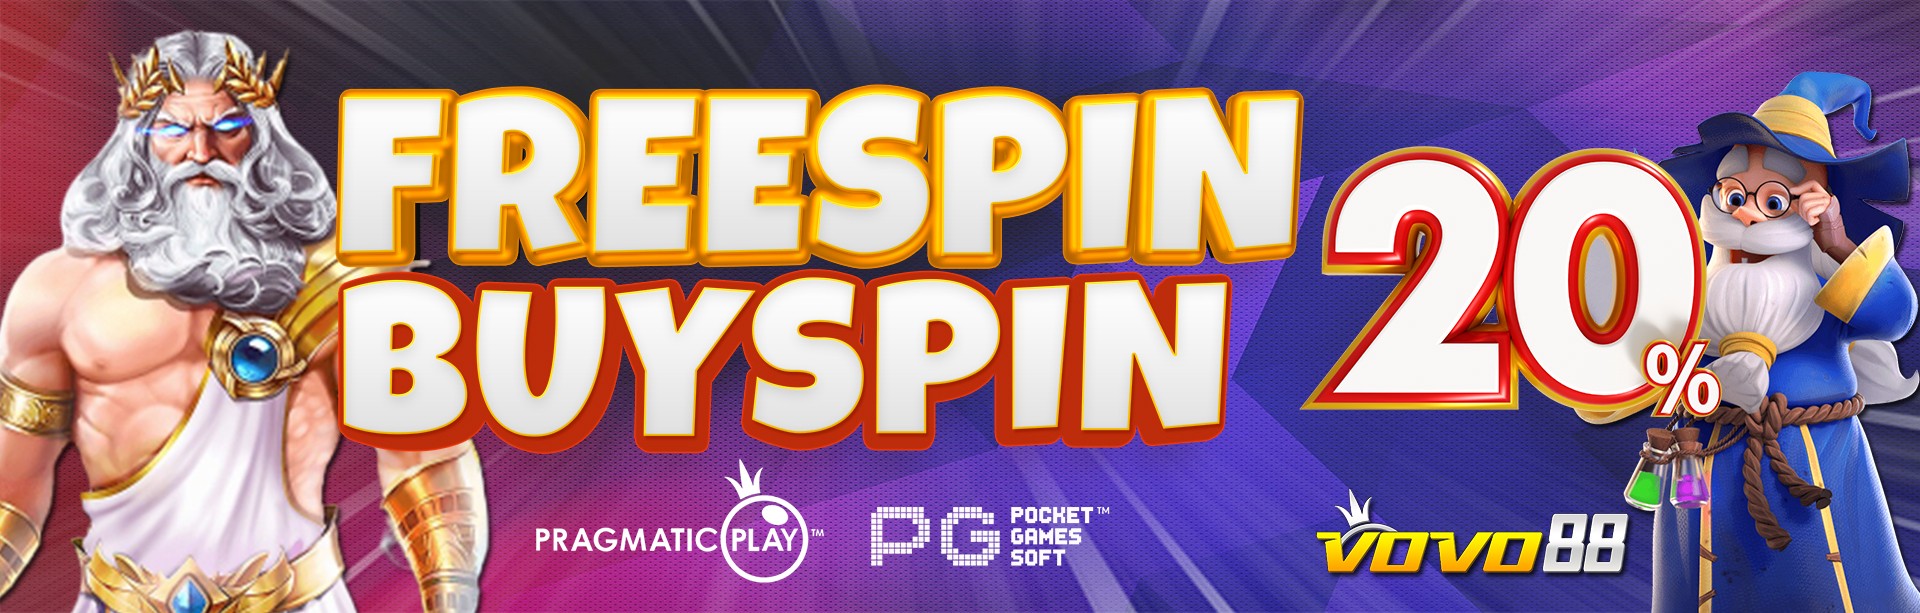 EVENT FREESPIN BUYSPIN 20%